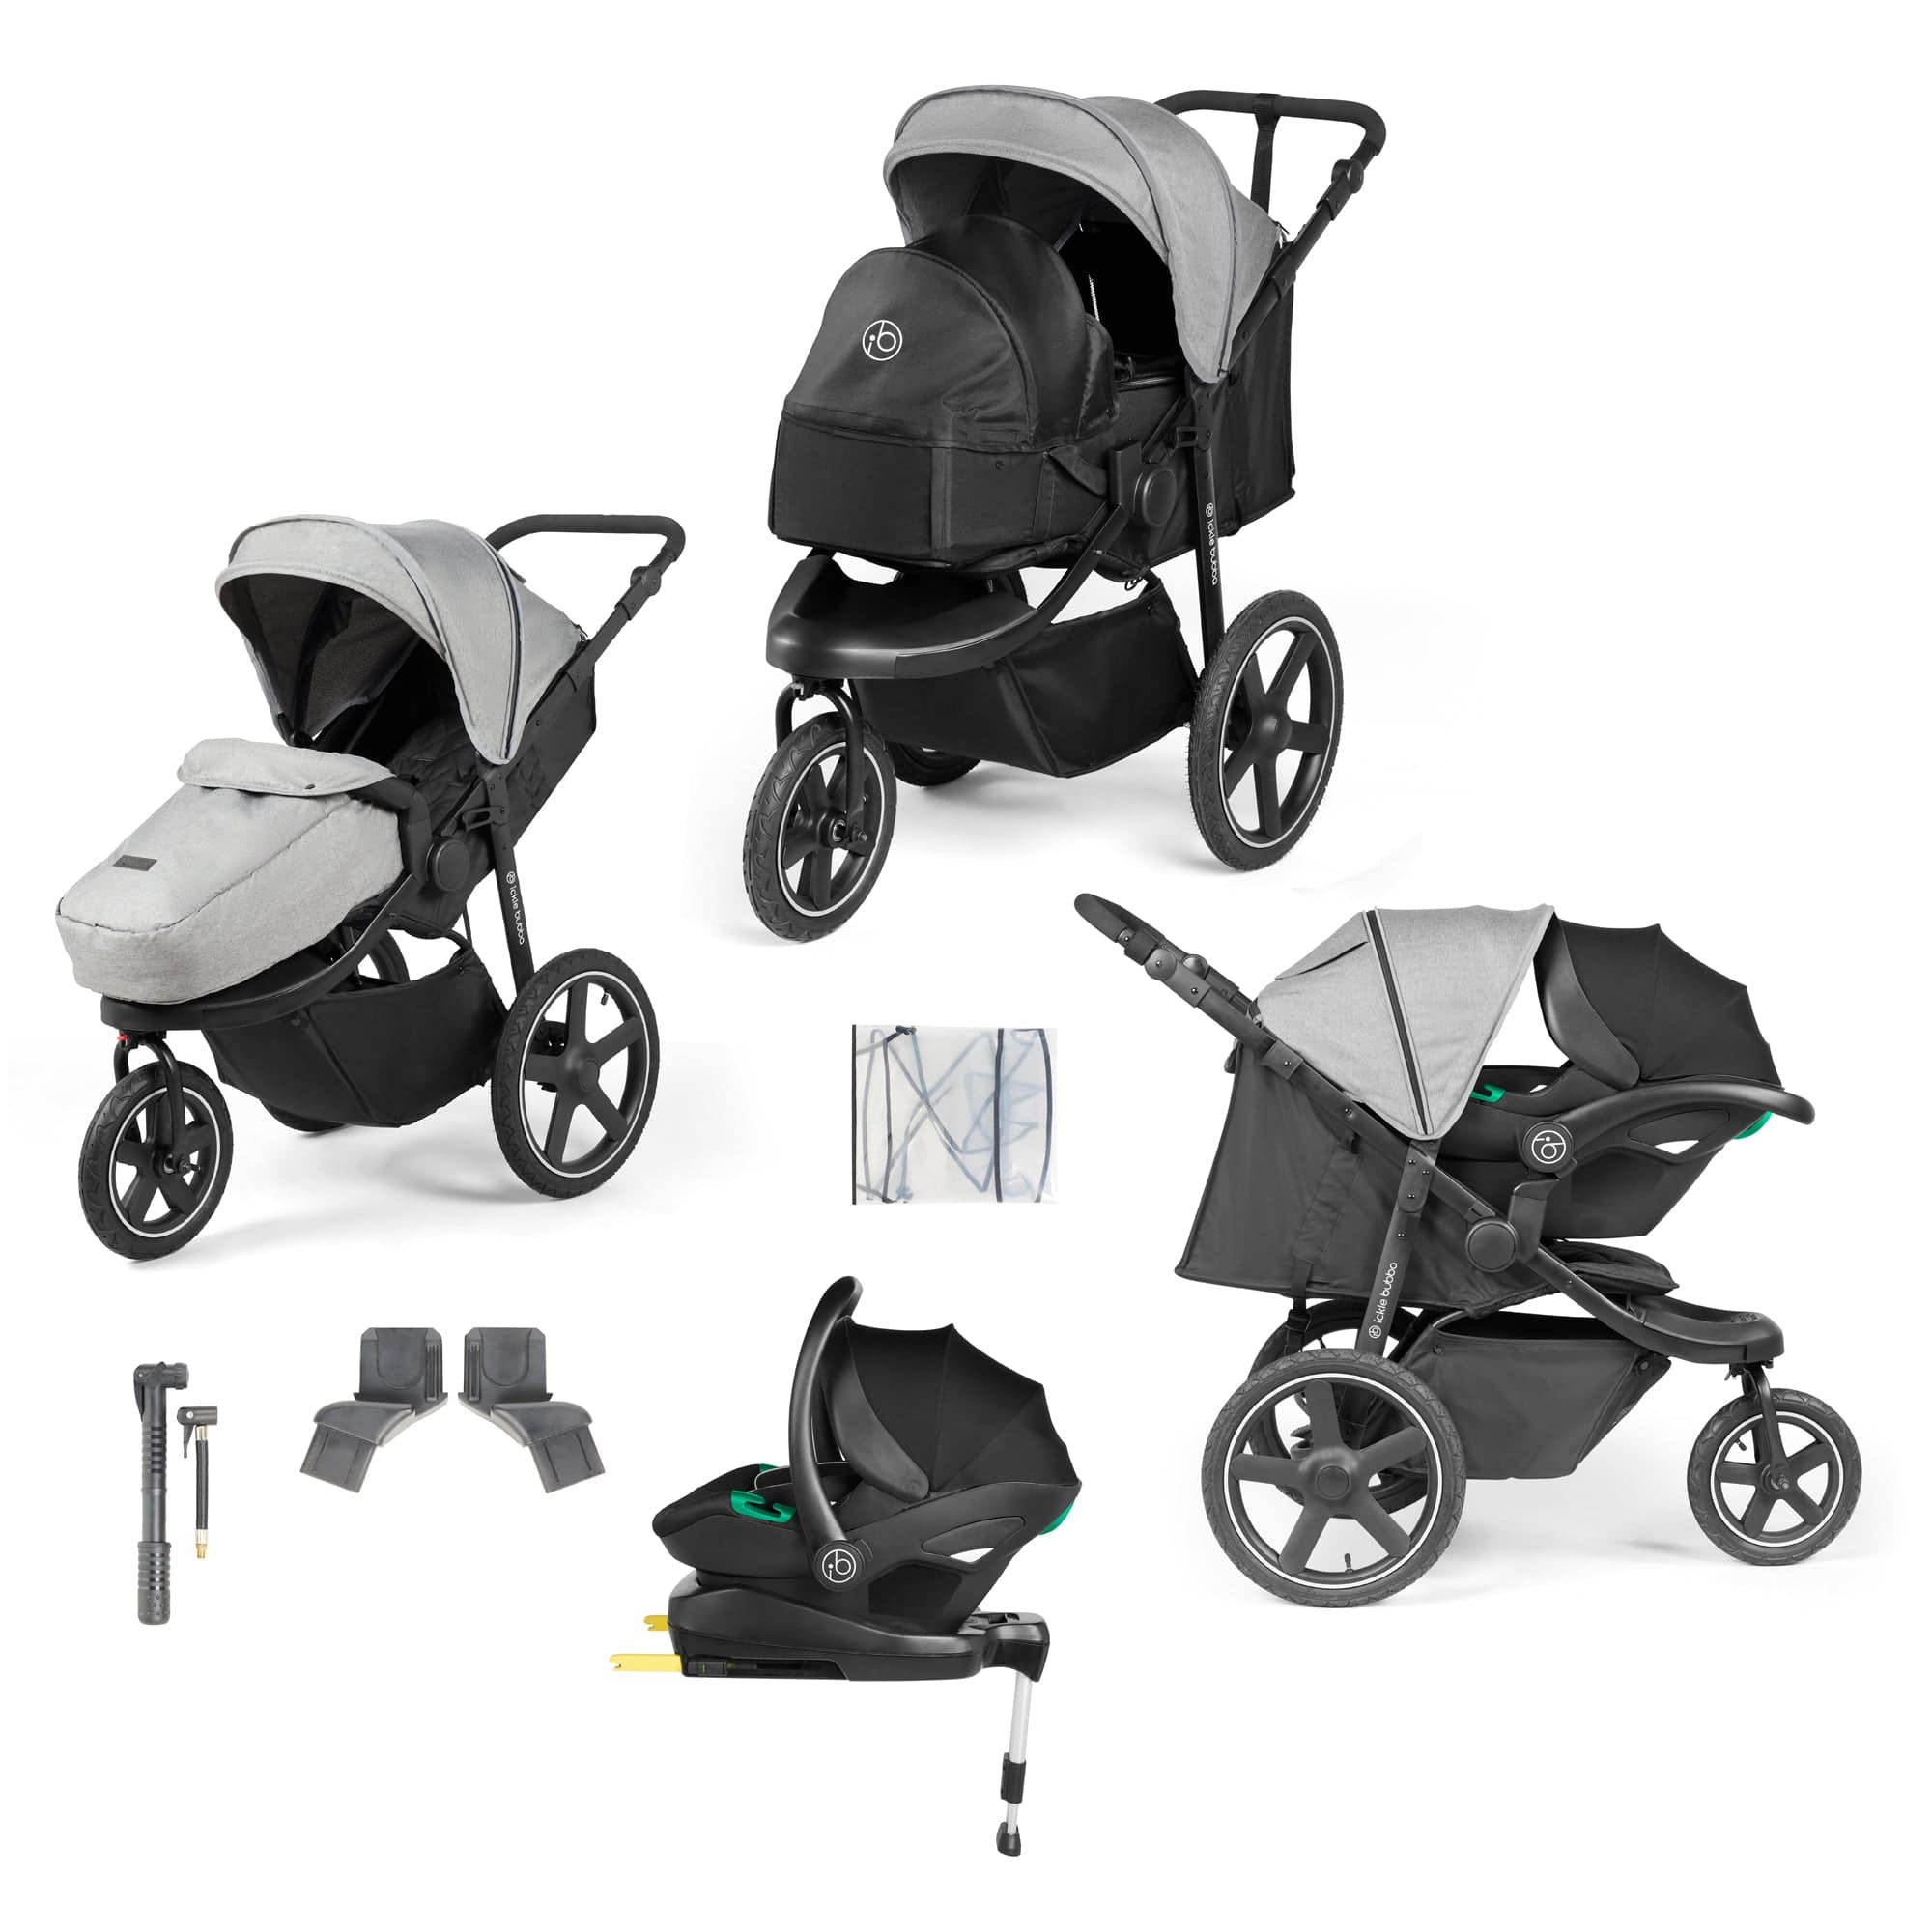 Ickle Bubba Venus Prime Jogger Stroller I-Size Travel System in Black/Space Grey with Base 3 Wheelers 13-004-600-014 5056515025934